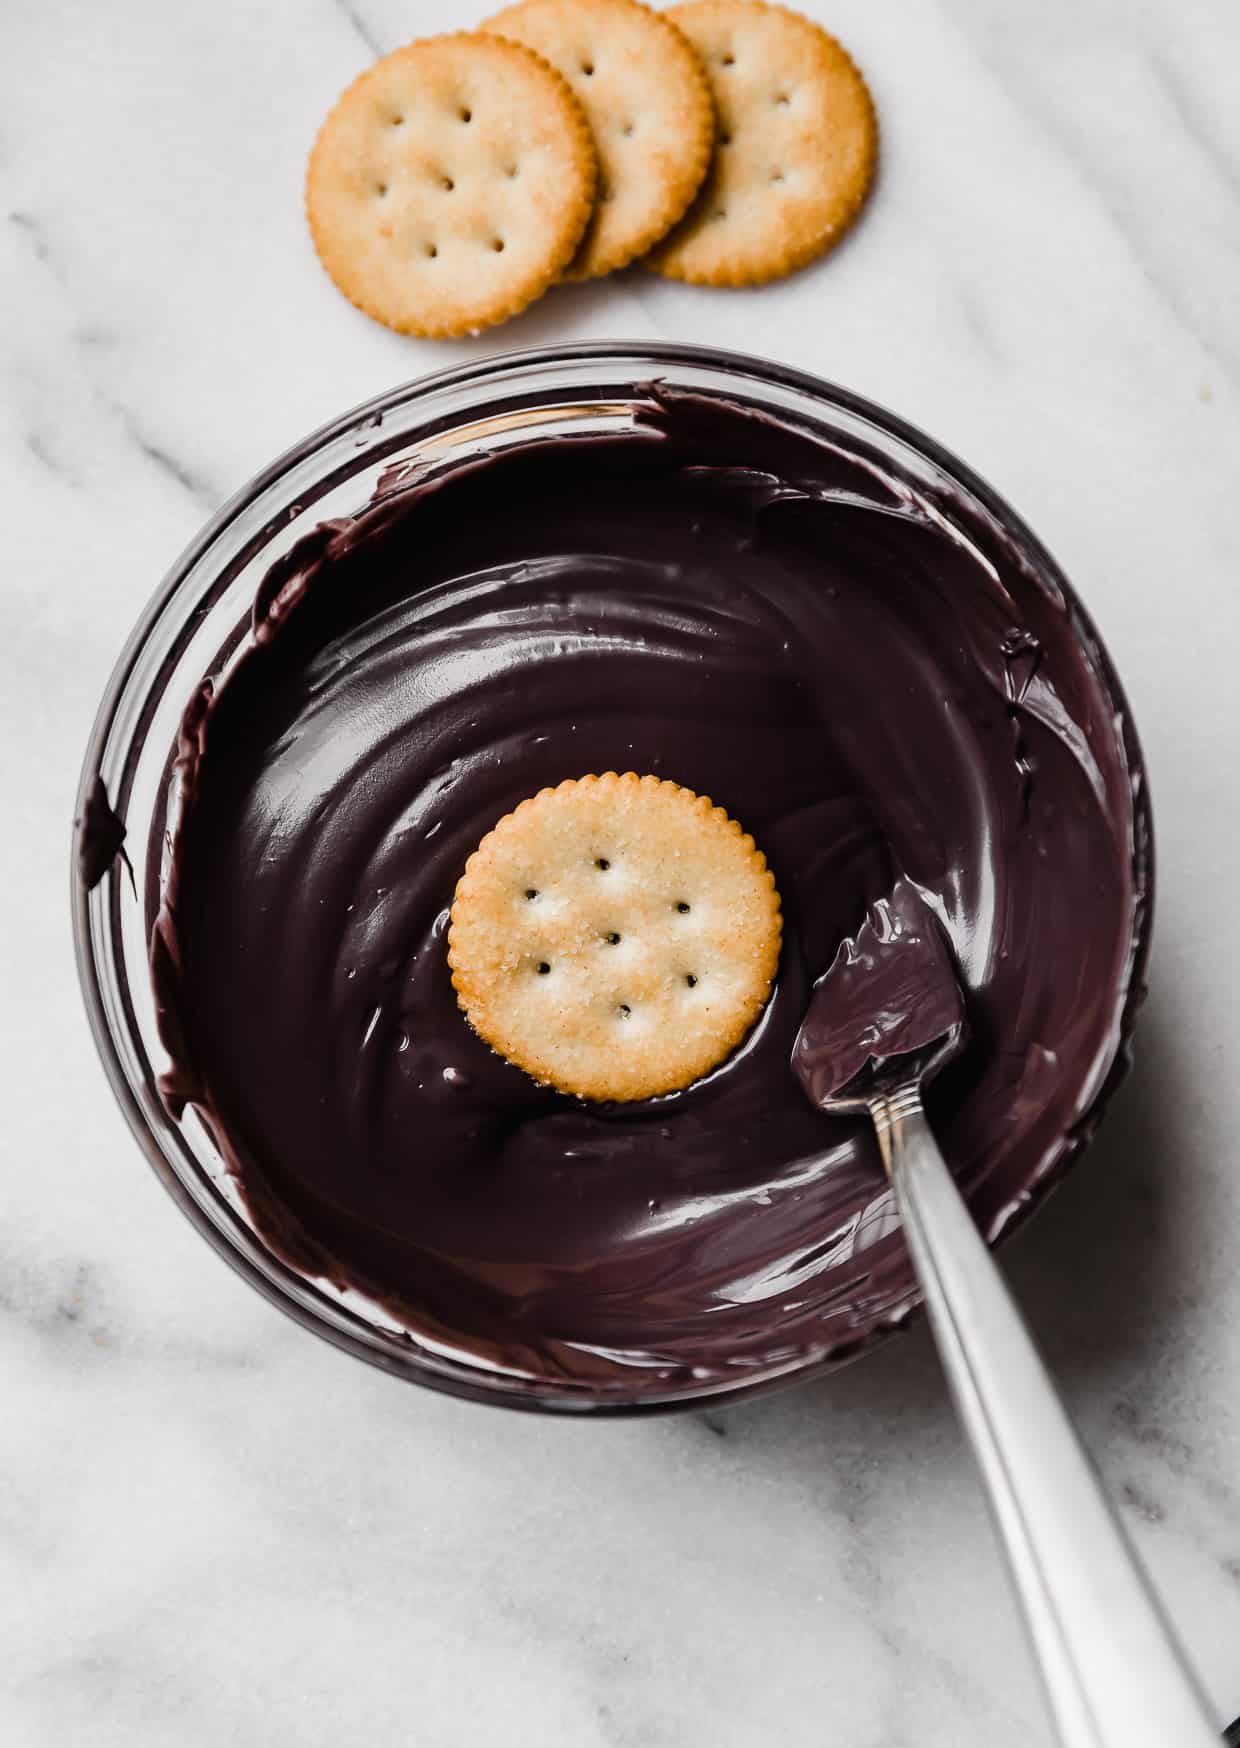 A ritz cracker in a bowl filled with black melted chocolate.